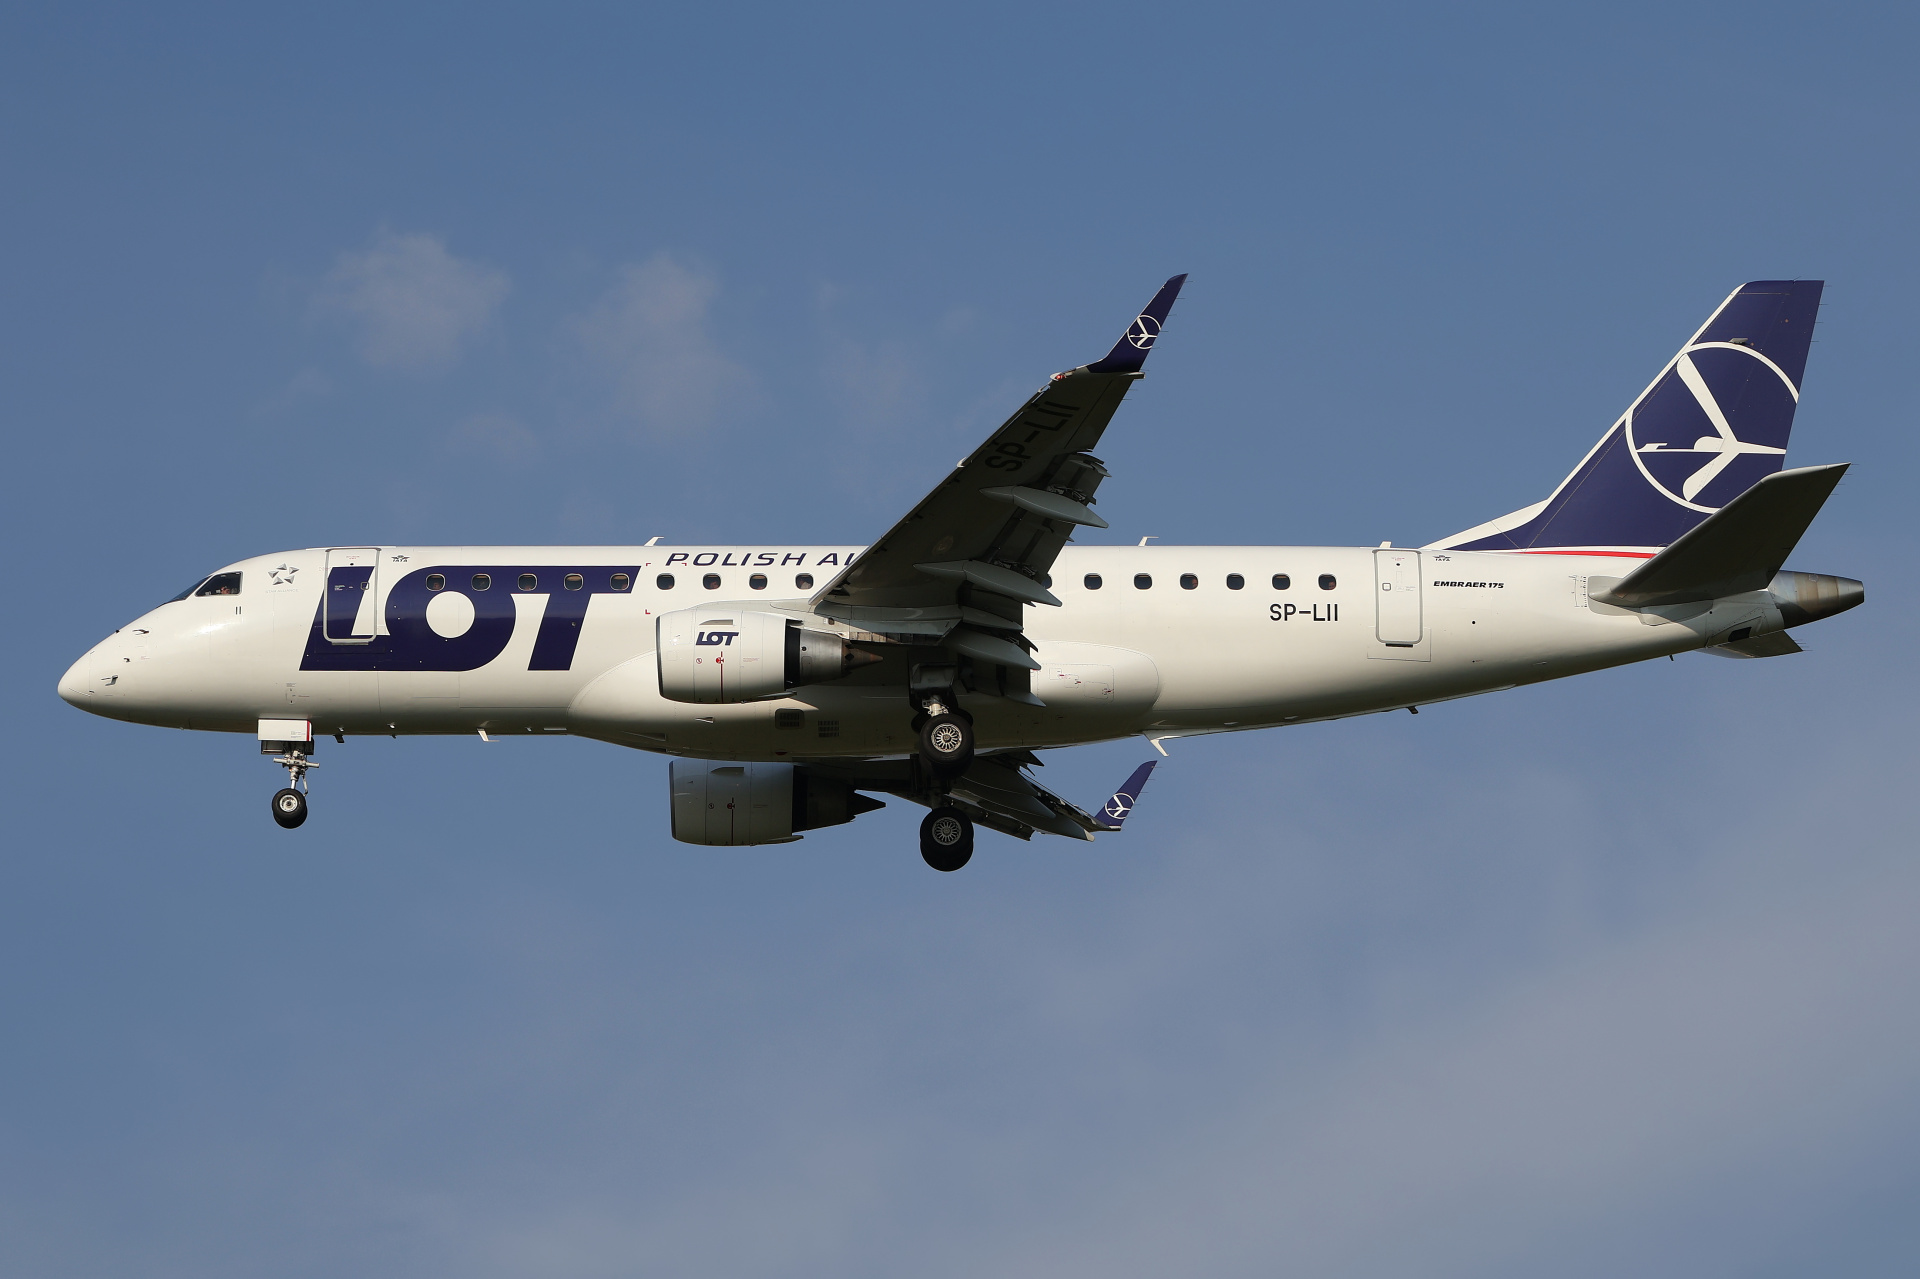 SP-LII (new livery) (Aircraft » EPWA Spotting » Embraer E175 » LOT Polish Airlines)